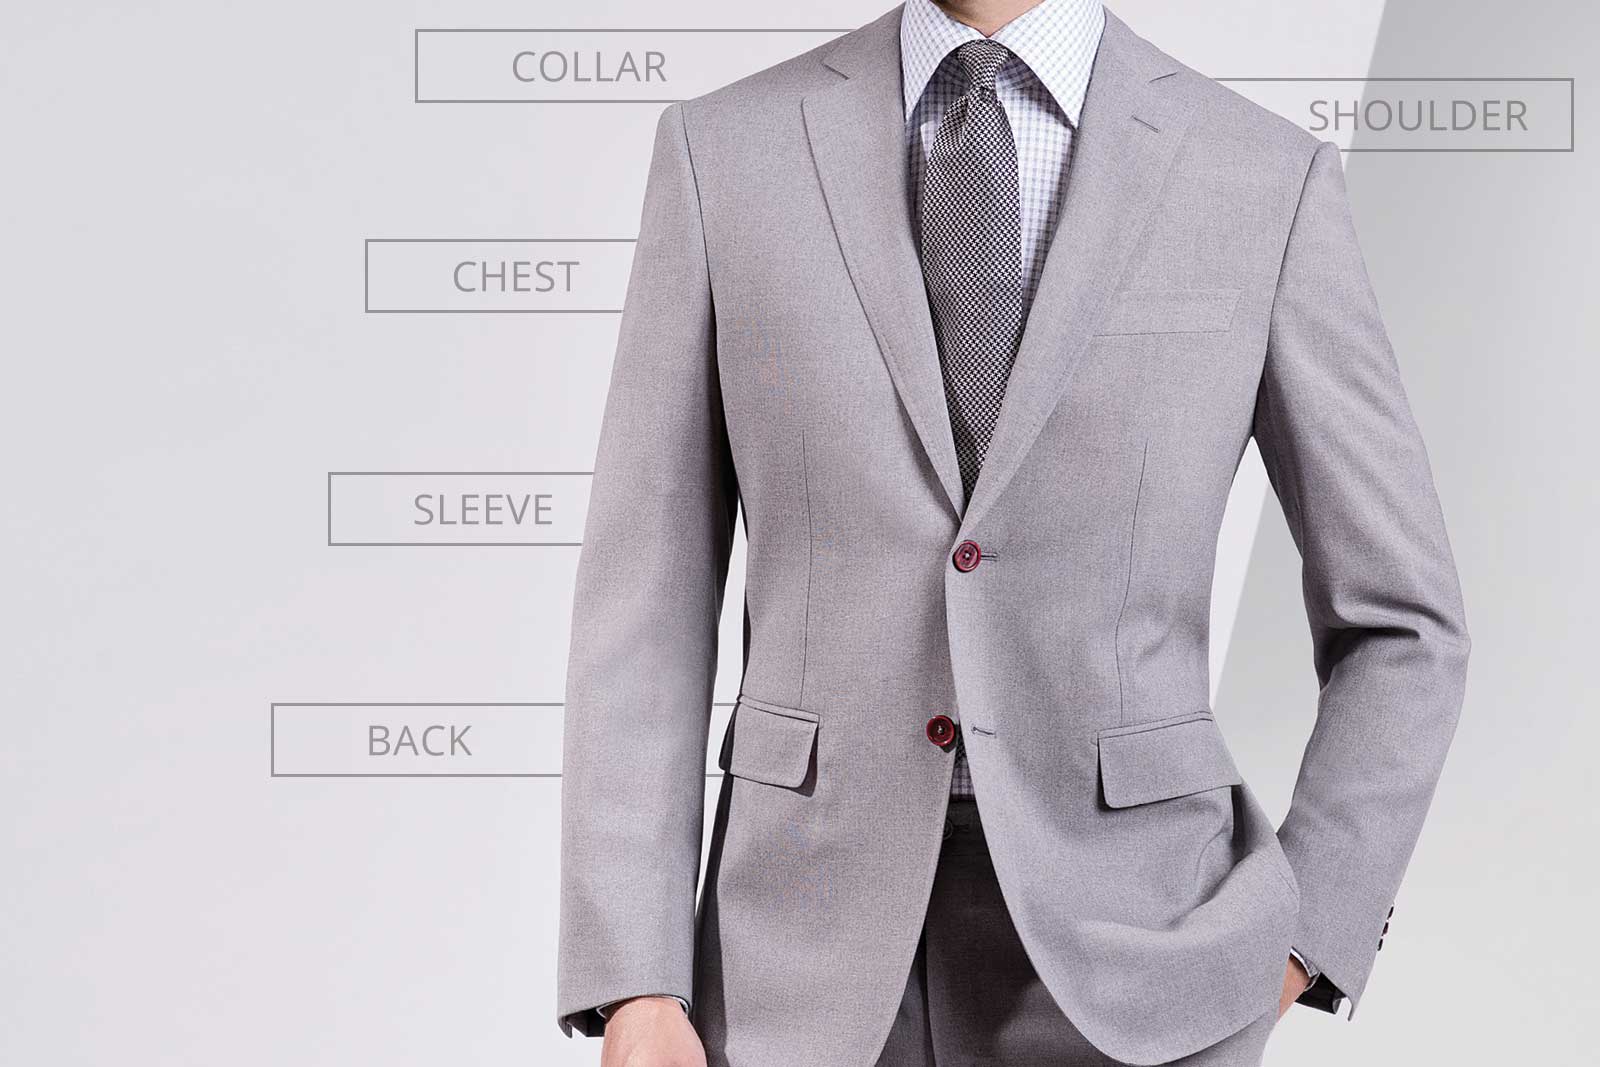 The Anatomy of a Fully Canvassed Suit